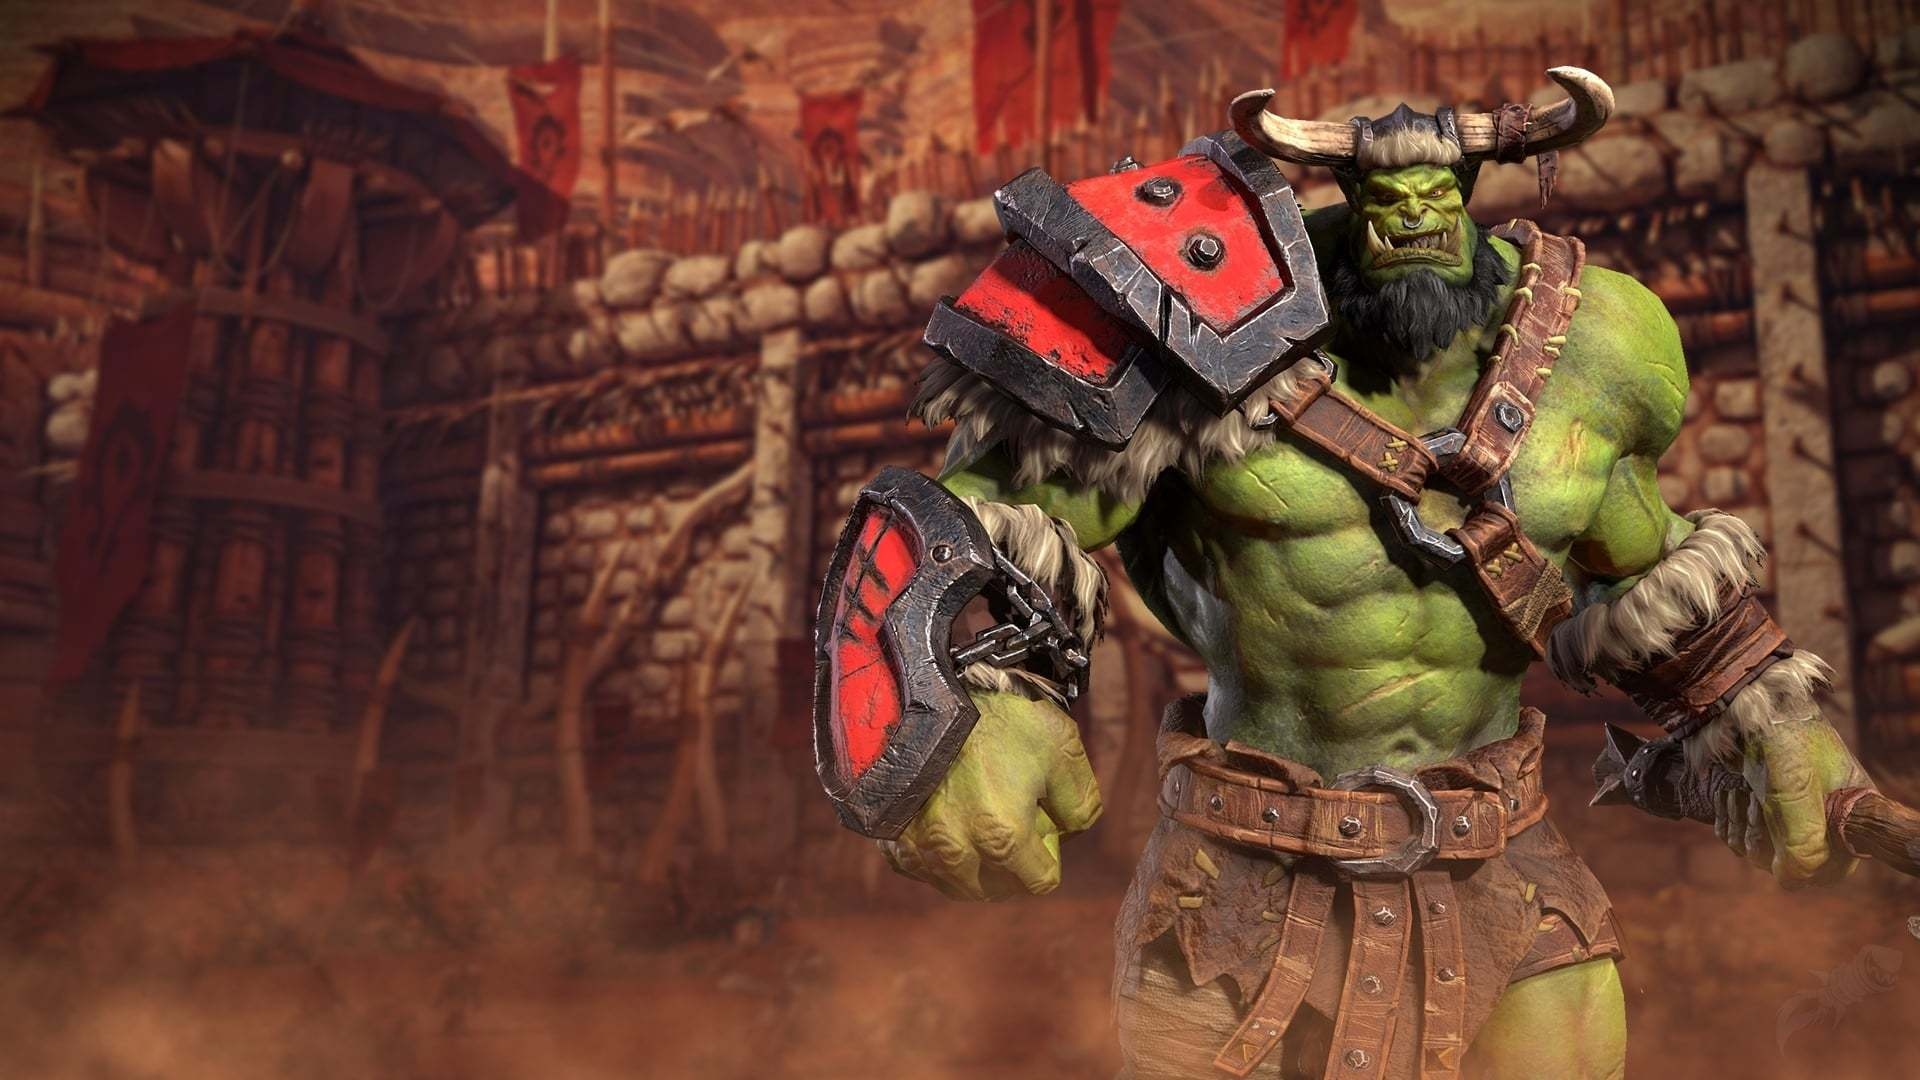 Expect news of Warcraft III: Reforged in June